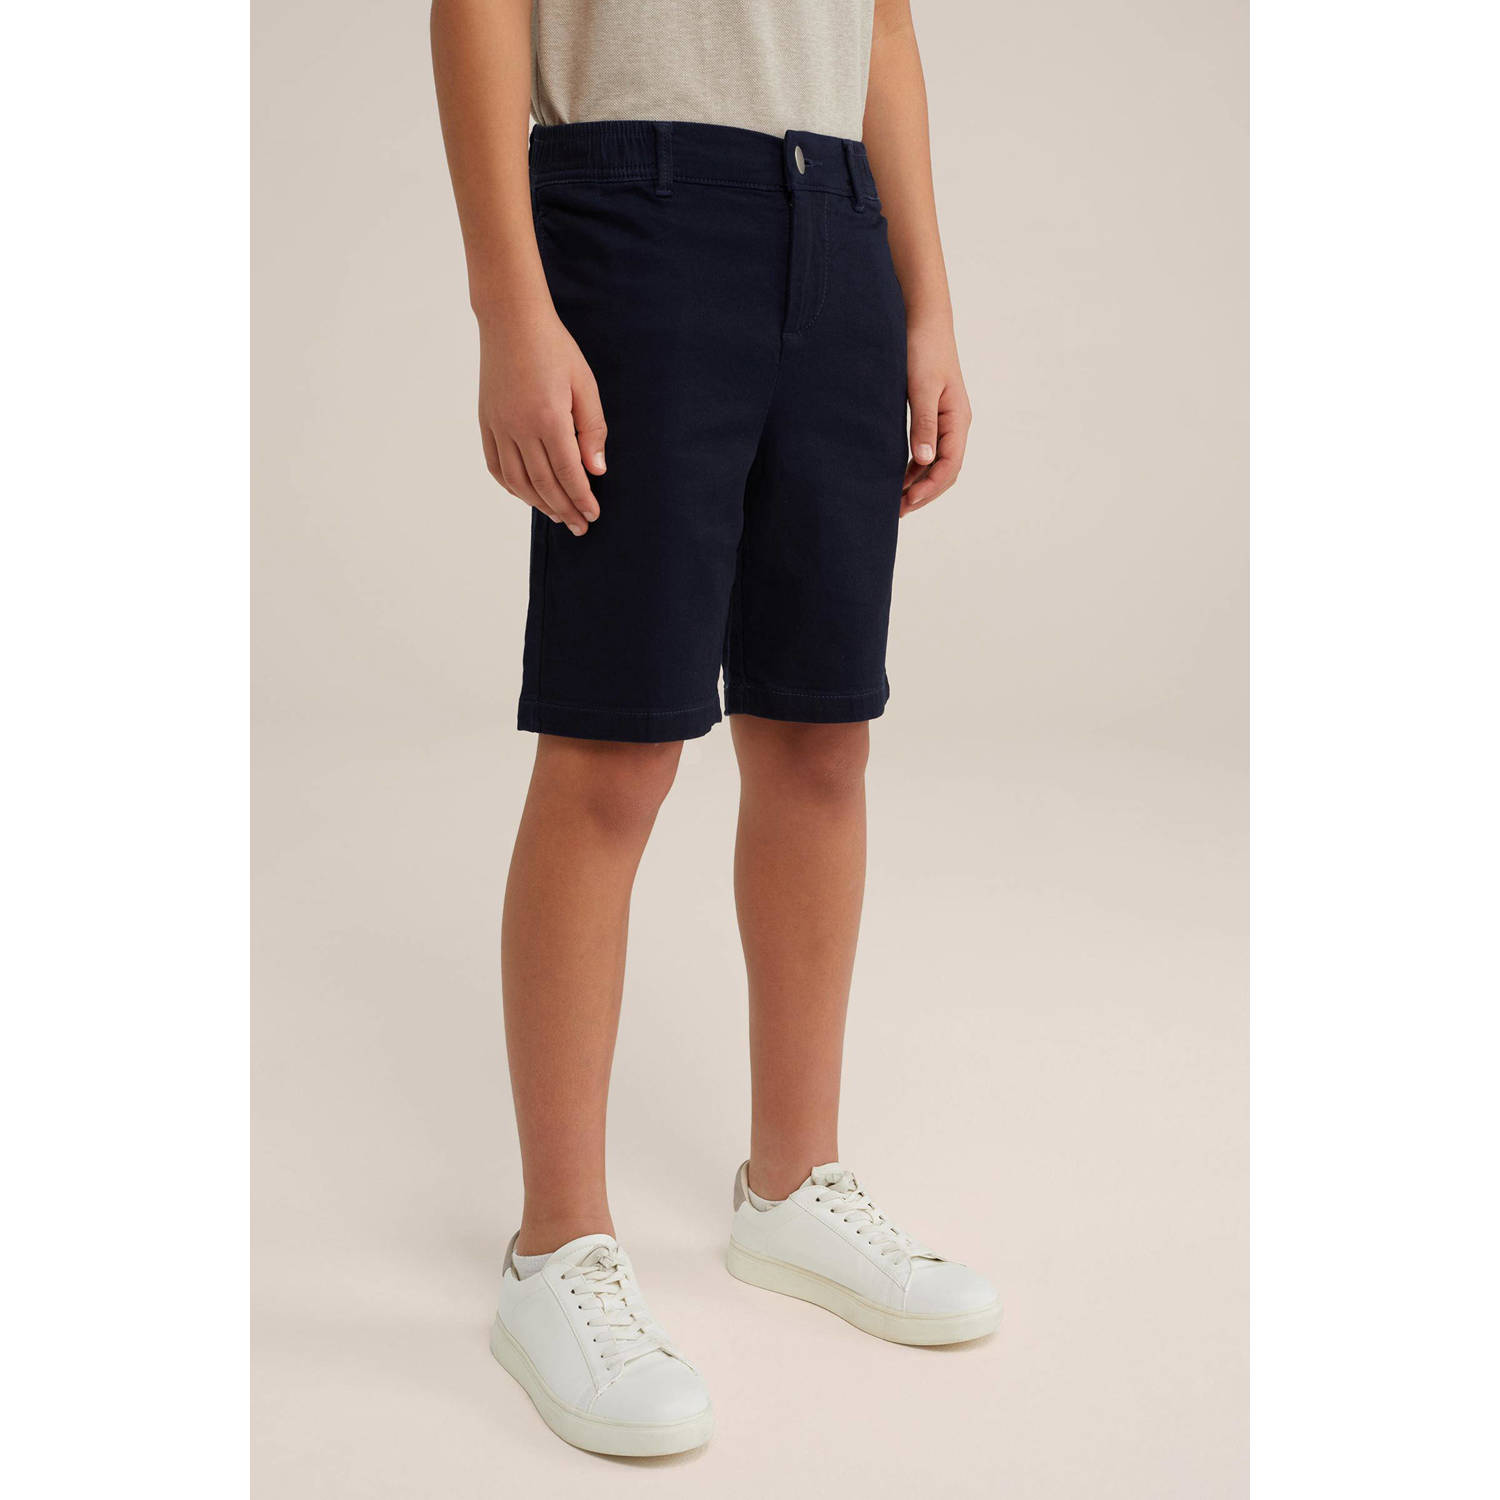 WE Fashion tapered fit chino short navy